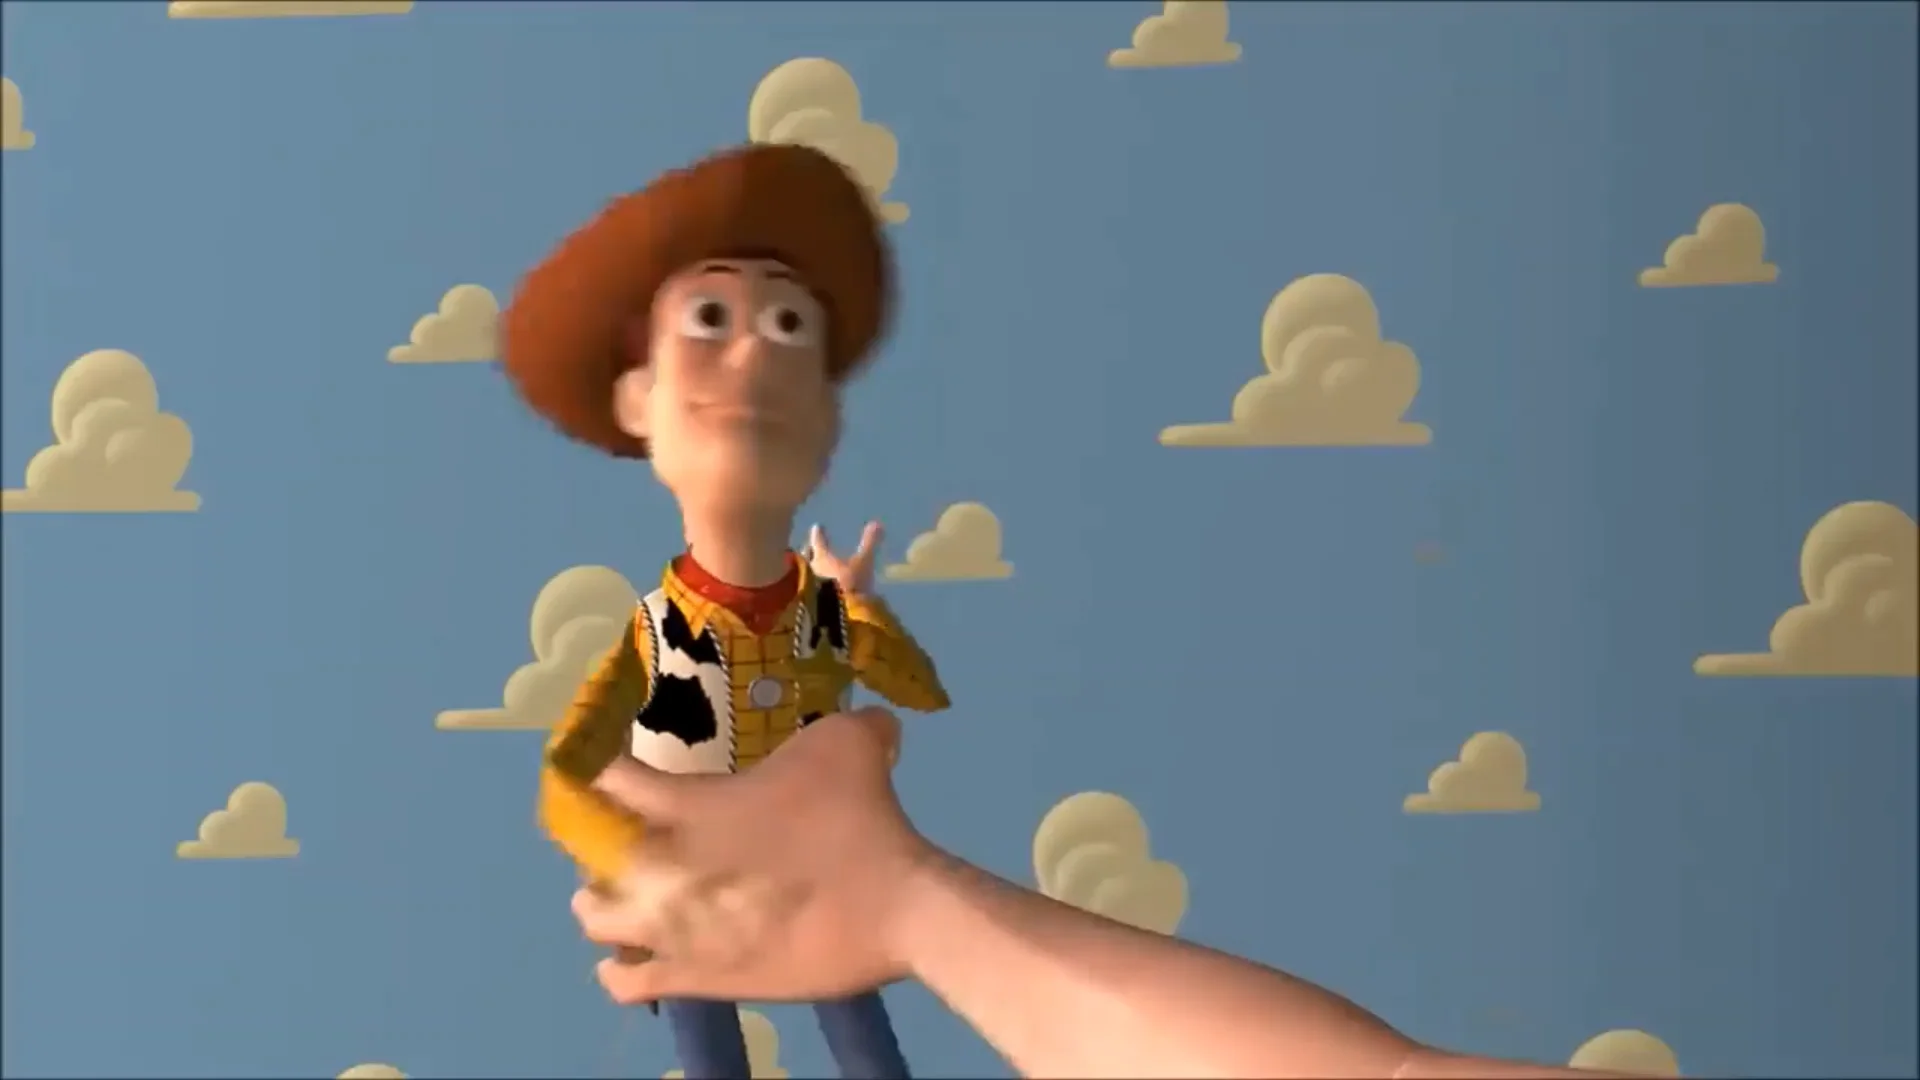 You’ve Got A Friend In Me (Toy Story, 1995)